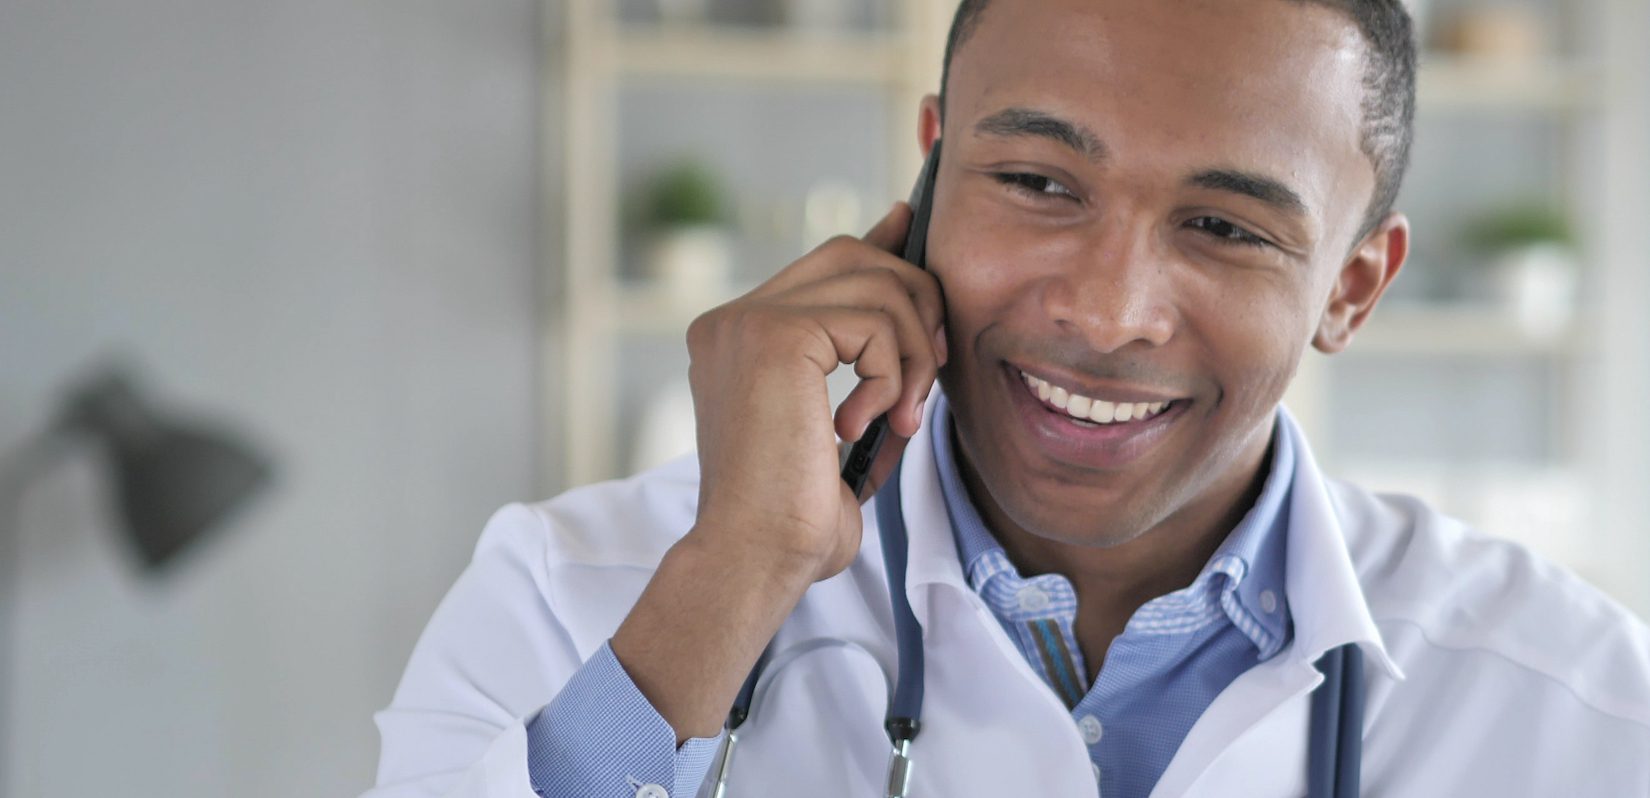 Smiling doctor on phone